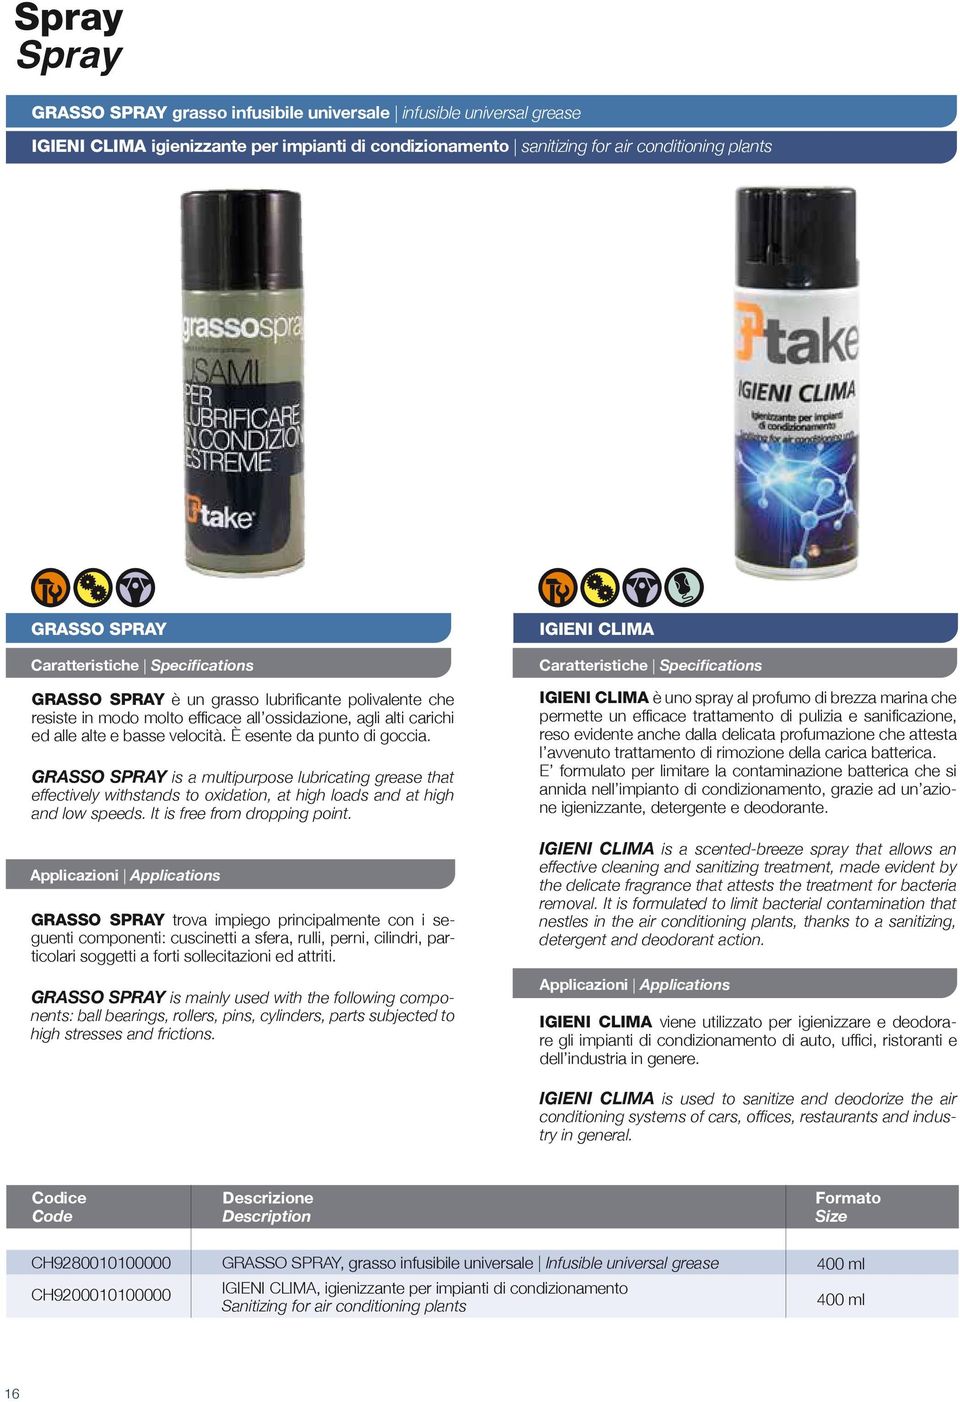 GRASSO SPRAY is a multipurpose lubricating grease that effectively withstands to oxidation, at high loads and at high and low speeds. It is free from dropping point.